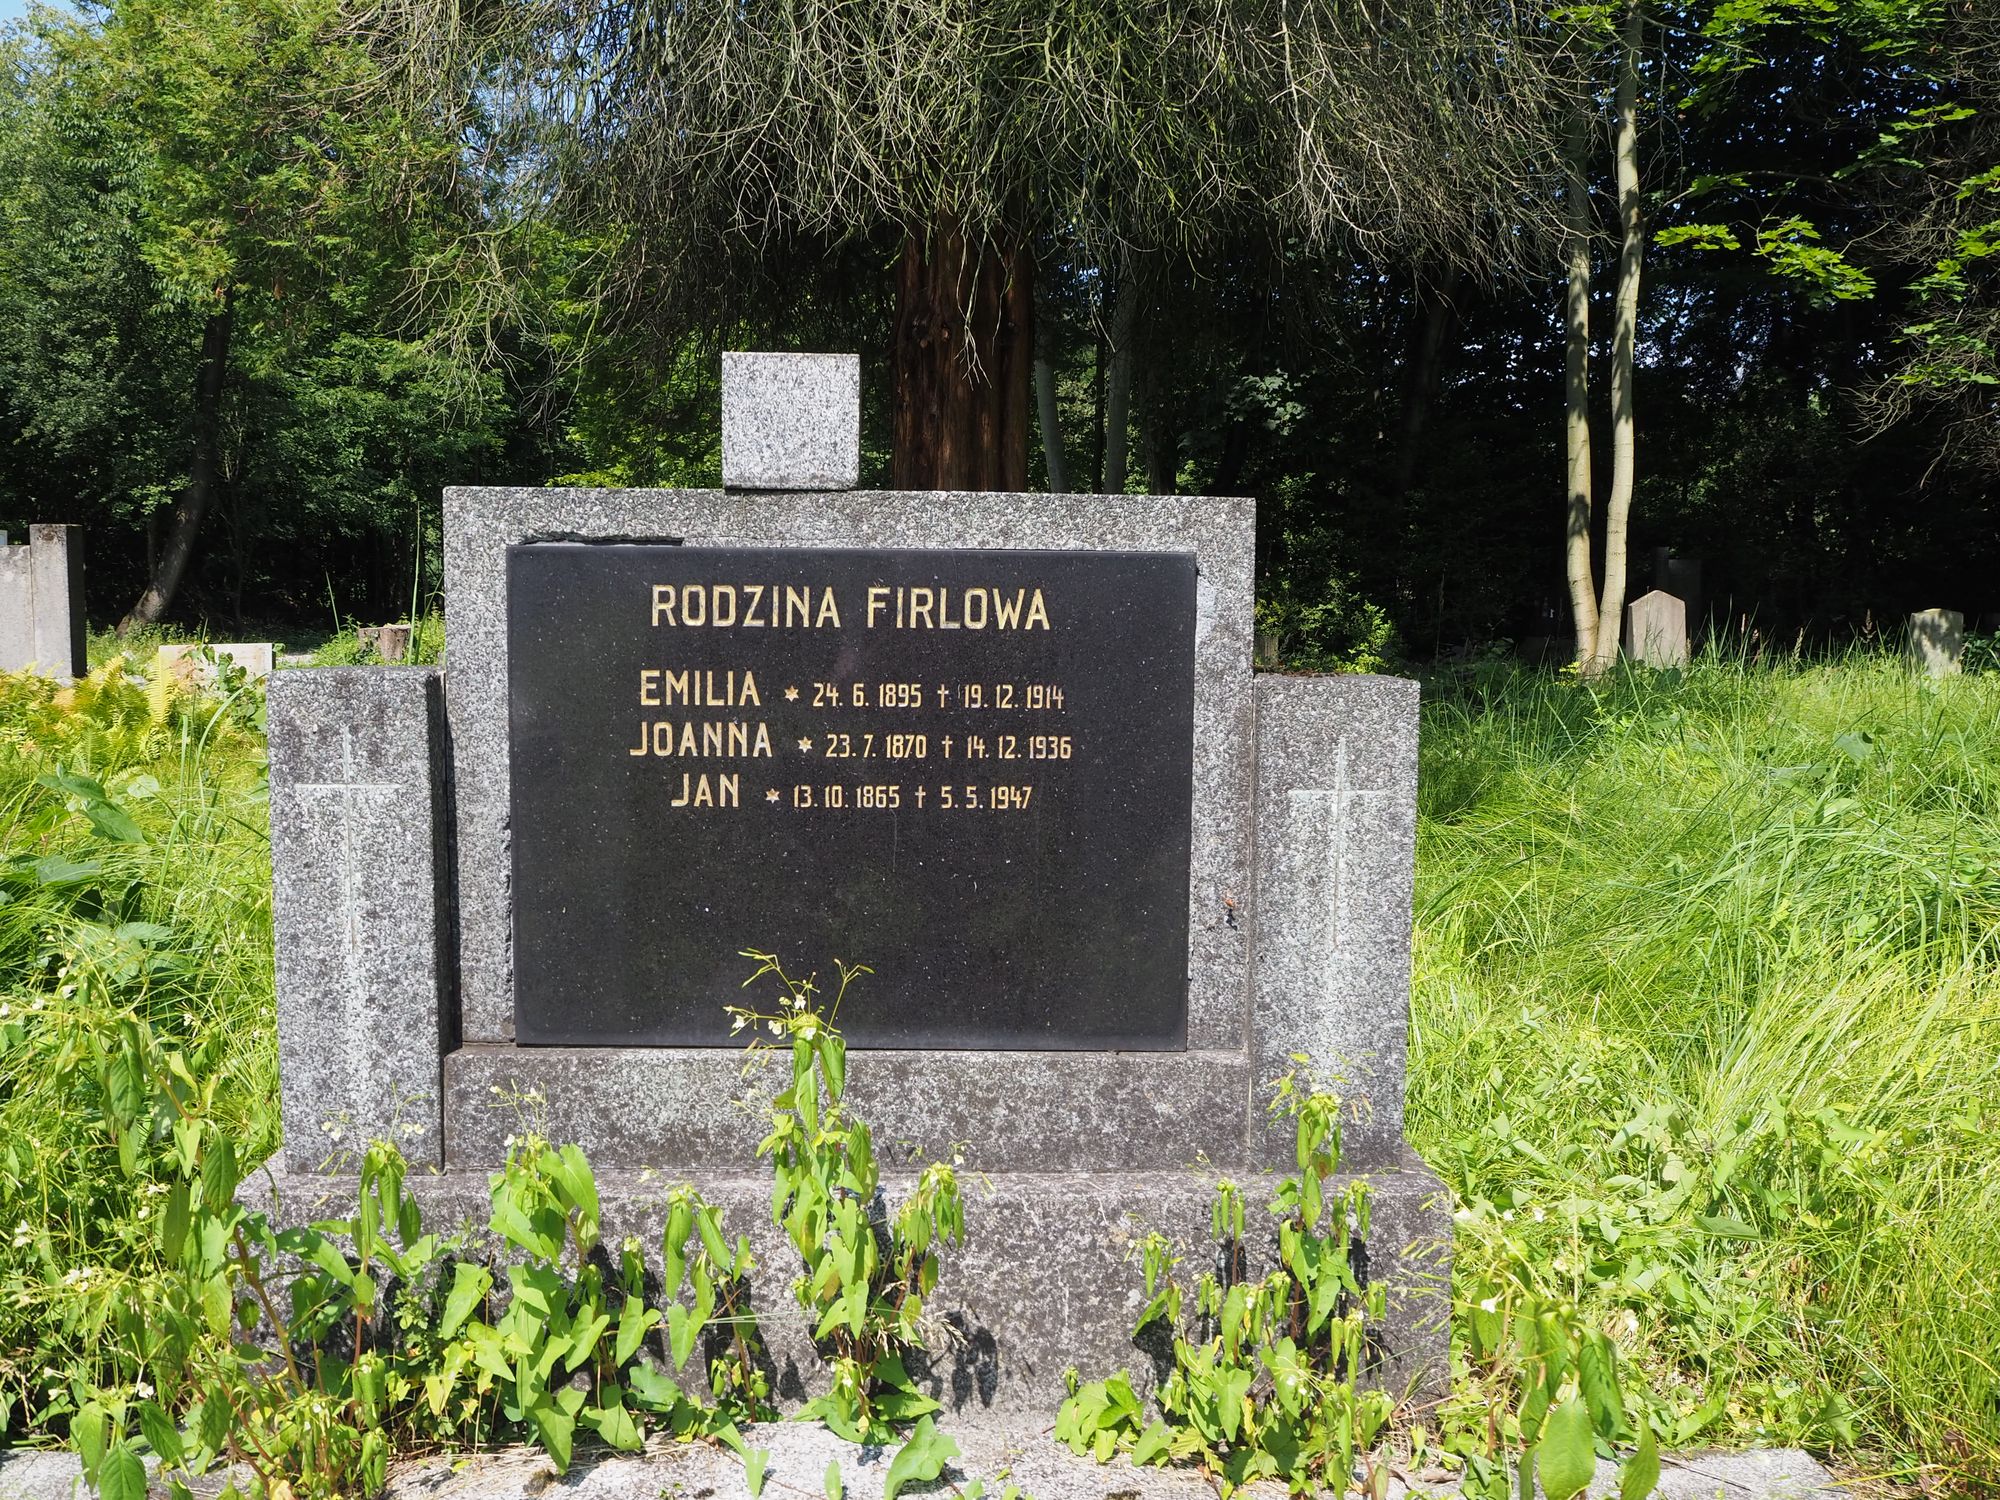 Tombstone of the Firlowa family, cemetery in Karviná Mexico, as of 2022.